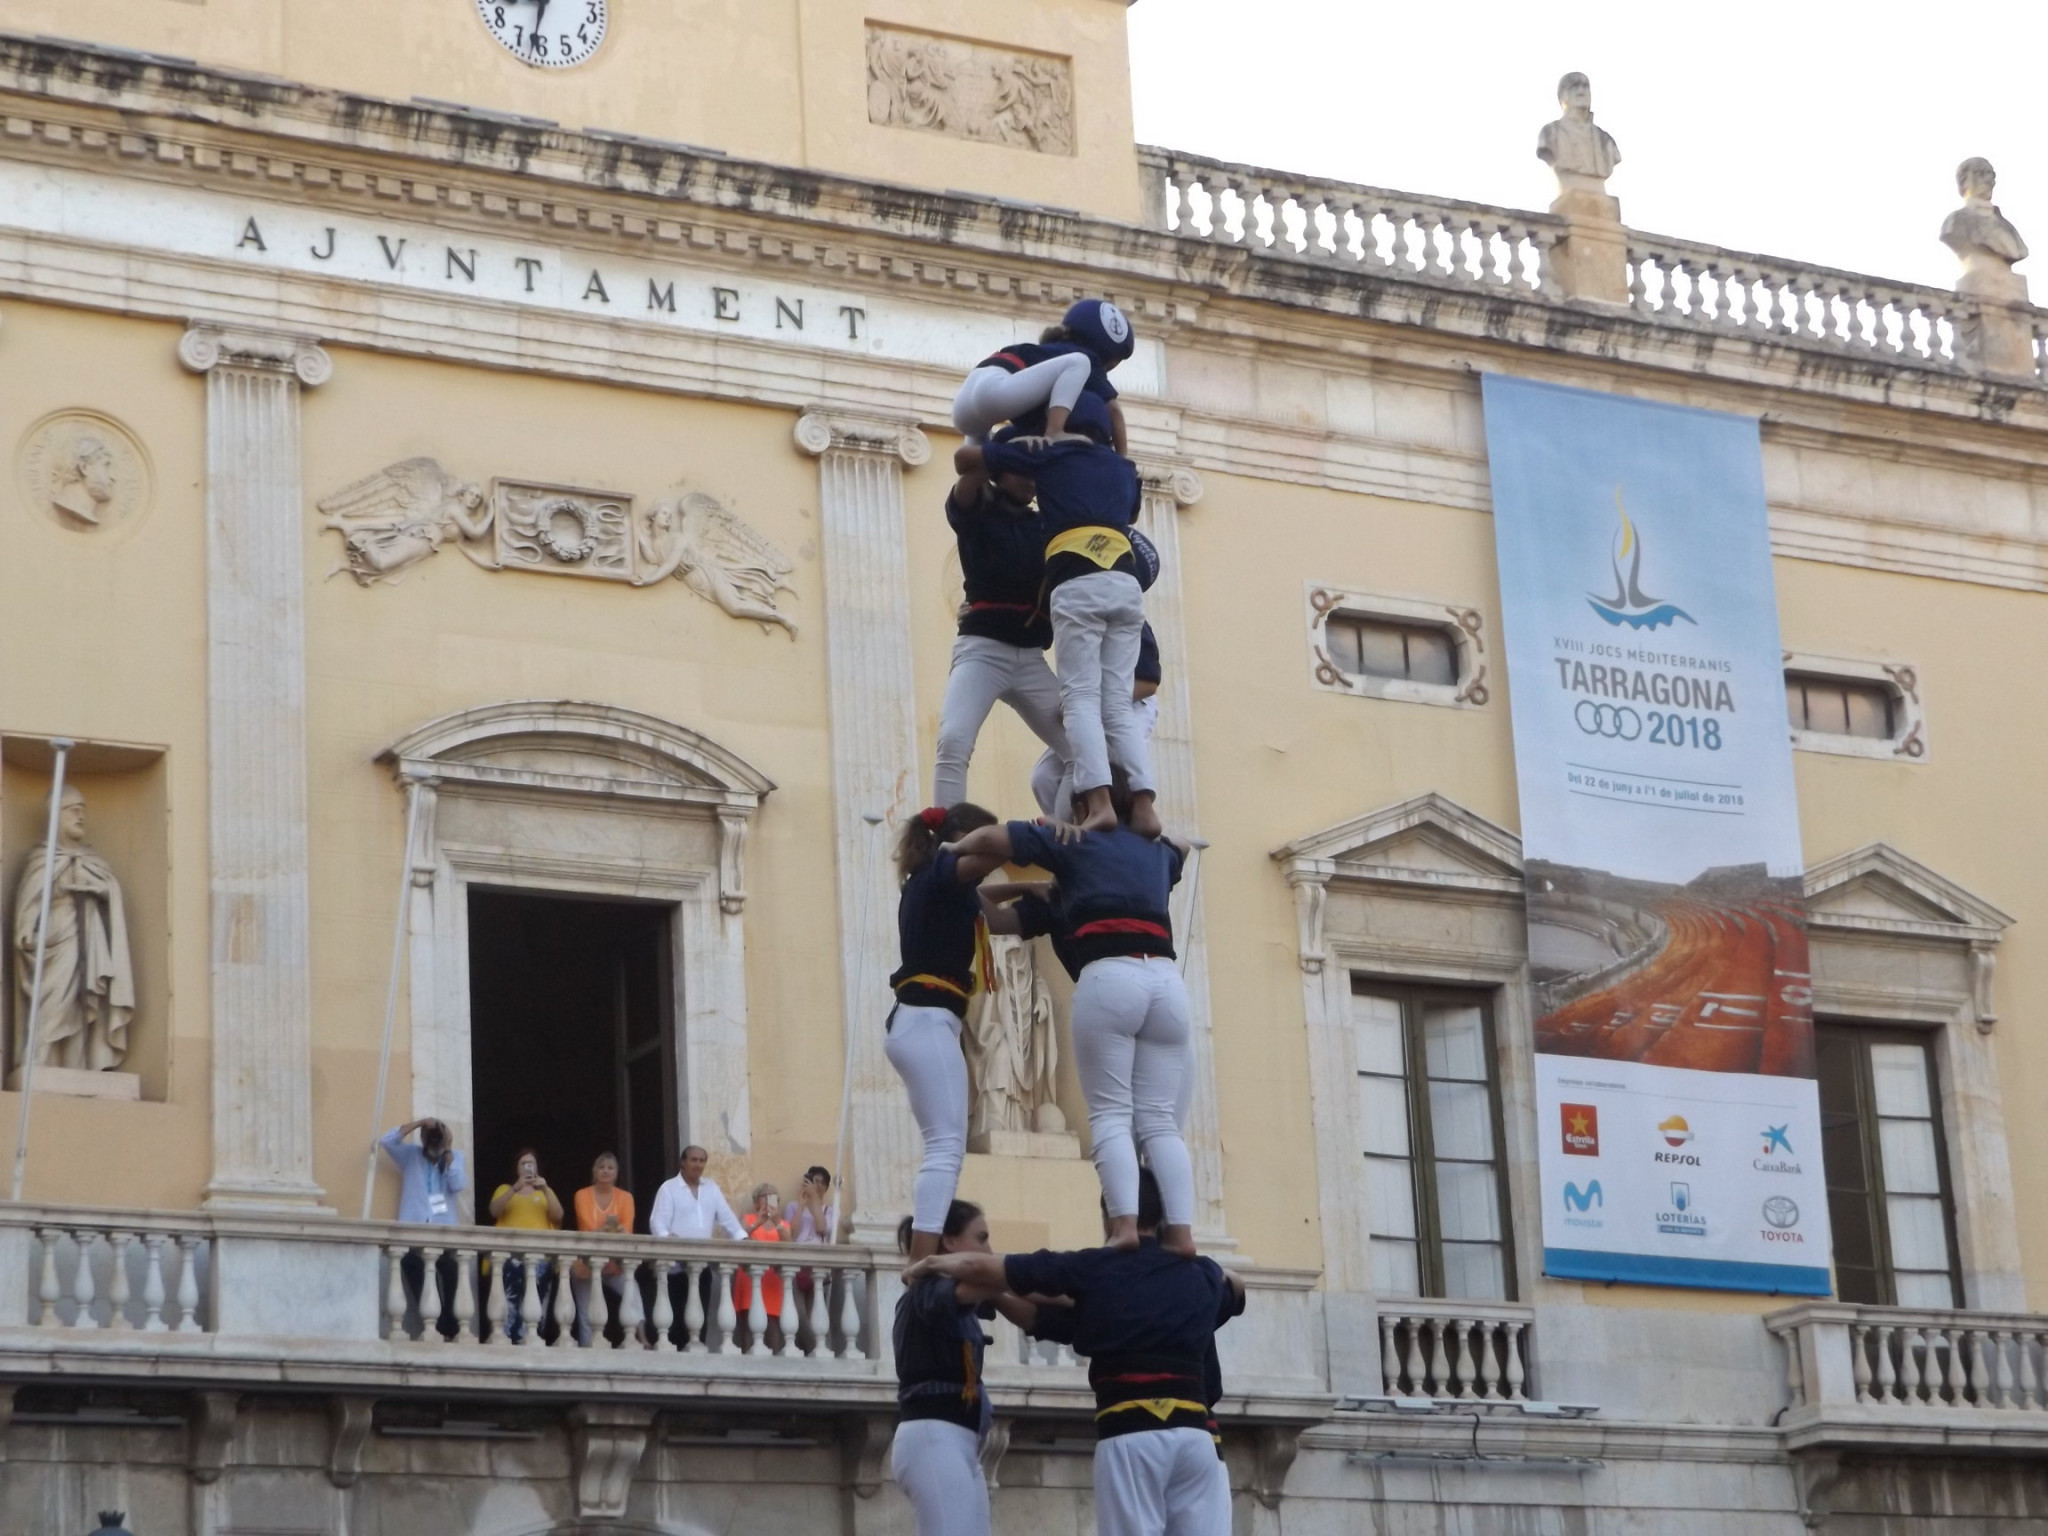 A human tower forms at the Mediterranean Games ©ITG